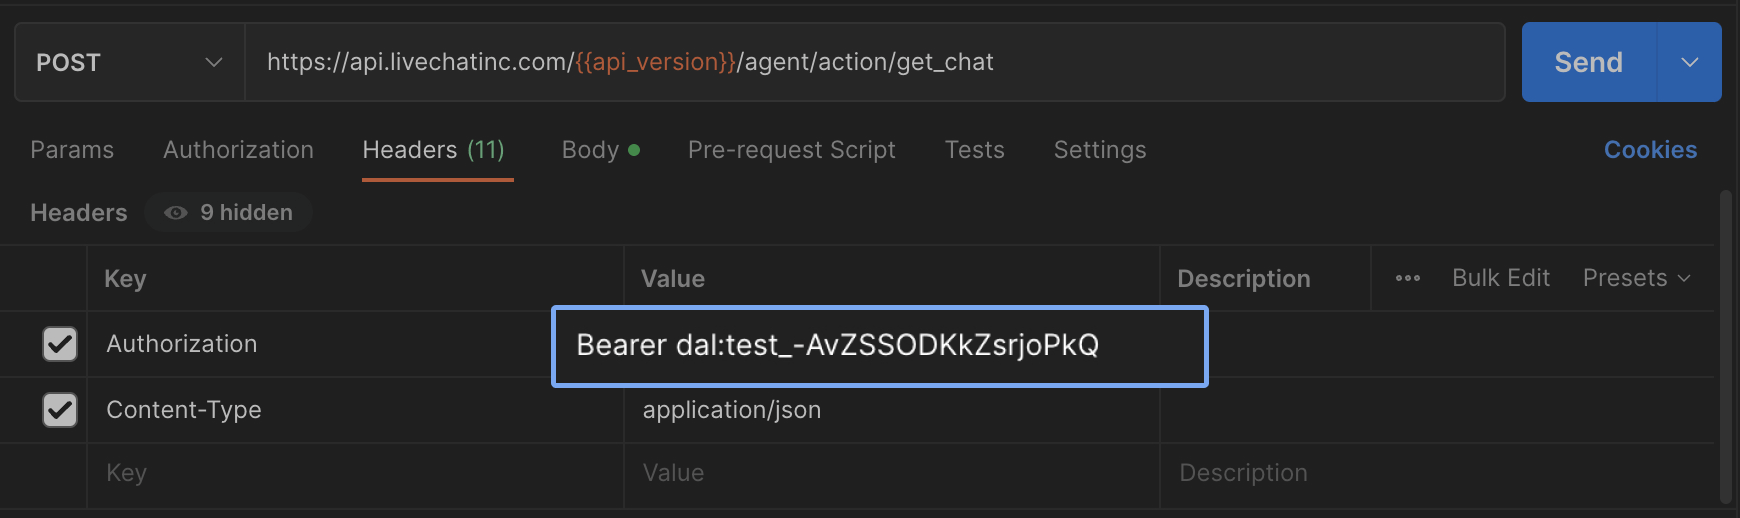 Paste access token to Postman's Authorization section